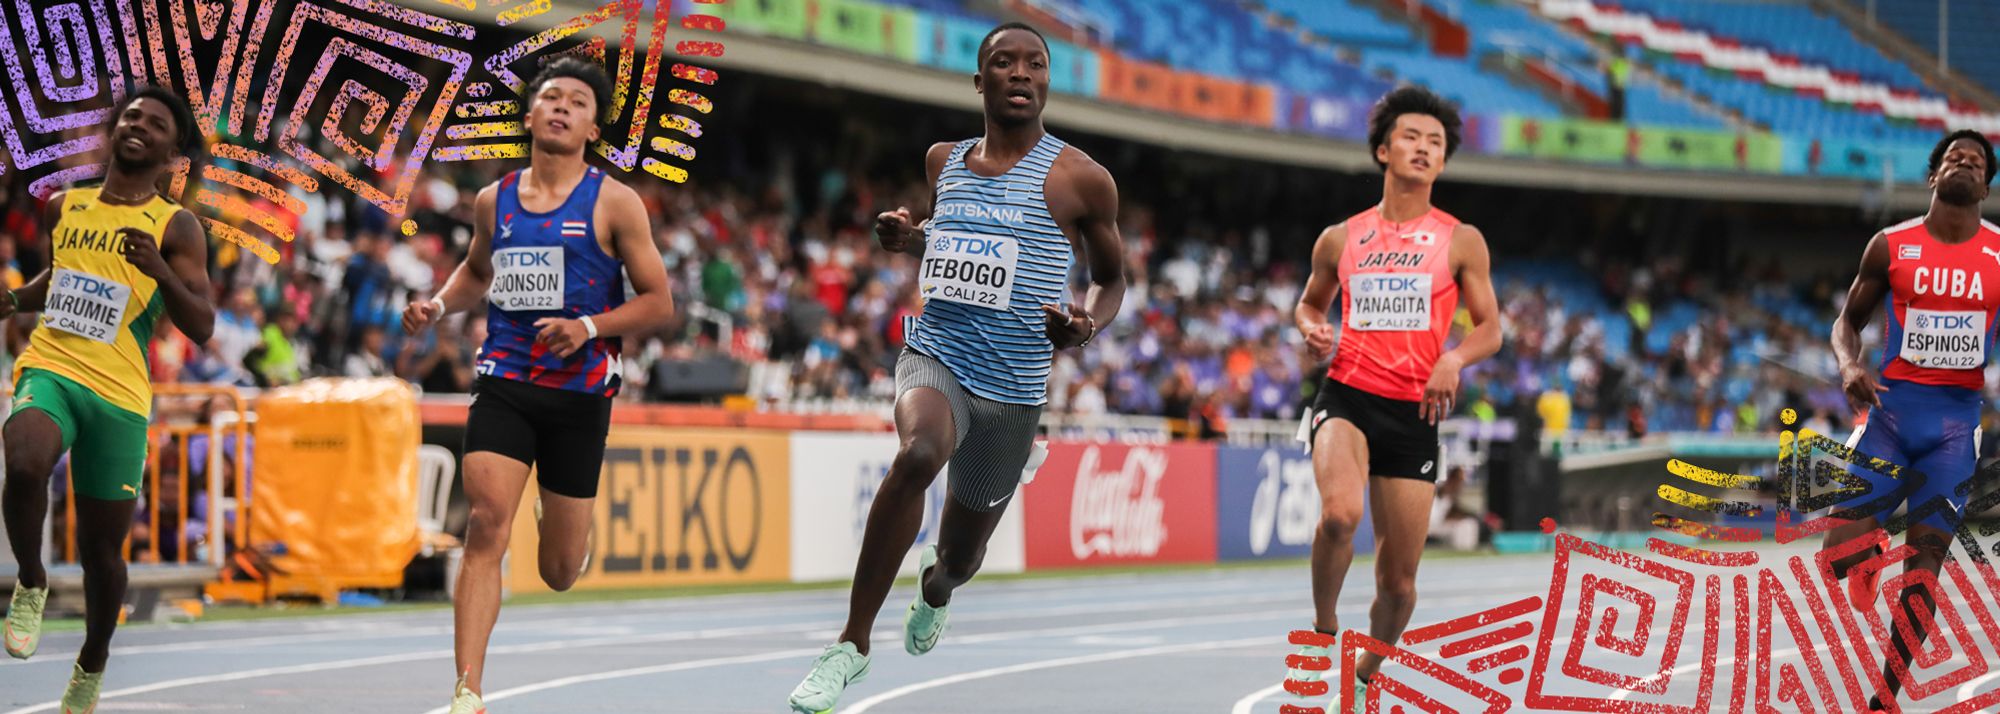 New World Record as Tebogo runs 9.91 at World Athletics U20 Championships in Cali, Colombia